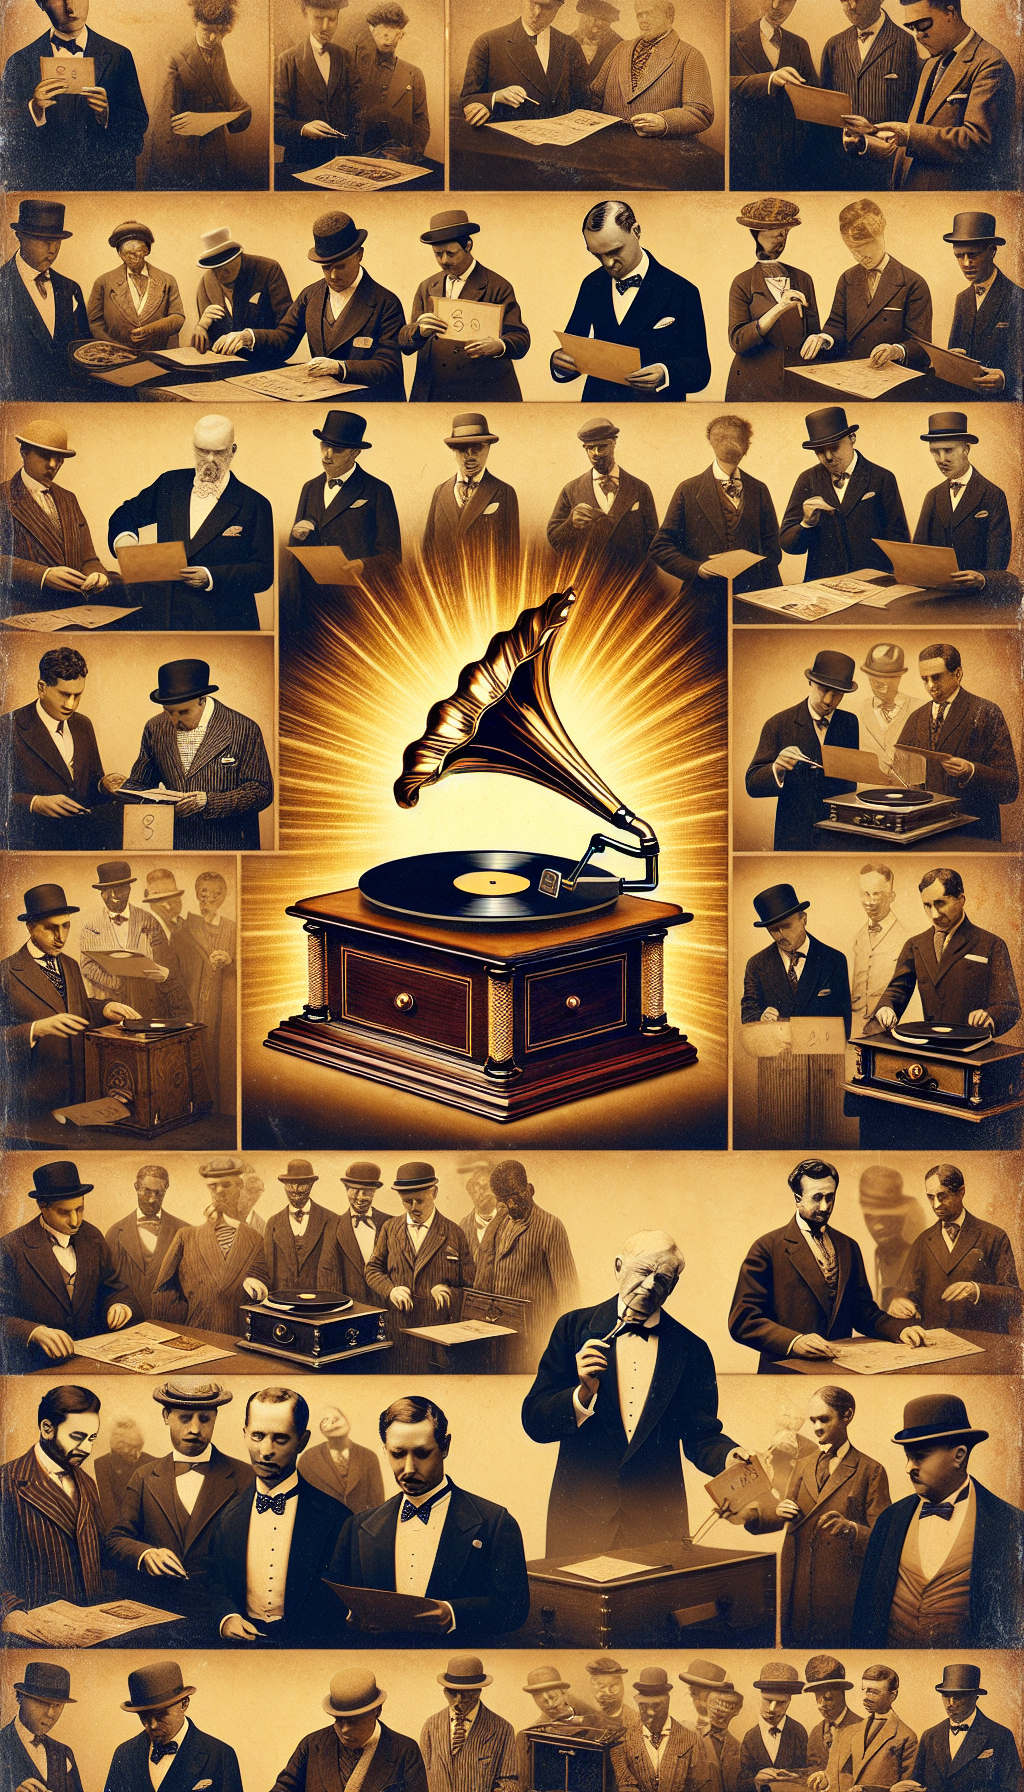 A collage of sepia-toned vignettes, each showcasing a unique Victrola amidst different appraisal scenarios: one surrounded by appraisers with magnifying glasses, another being admired by a diverse crowd, and a third with price tags floating overhead, all tied together by a gleaming golden note to symbolize the value of antique record players.